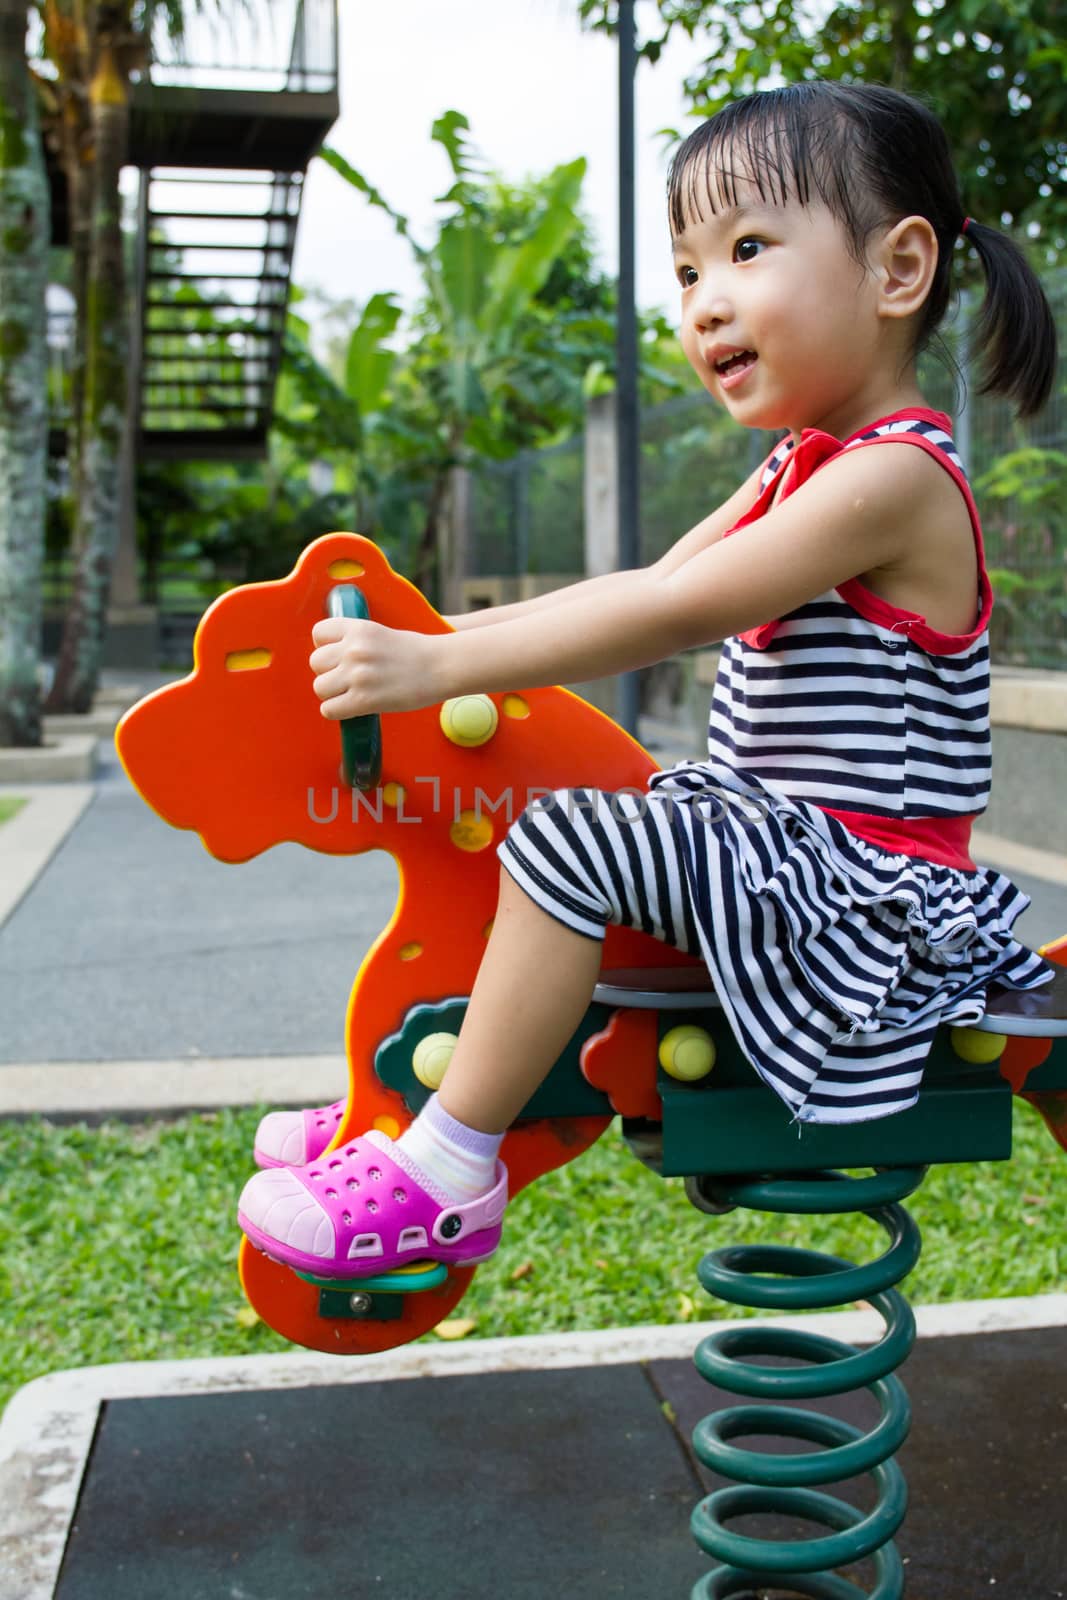 Asian Kid Riding at Park by kiankhoon